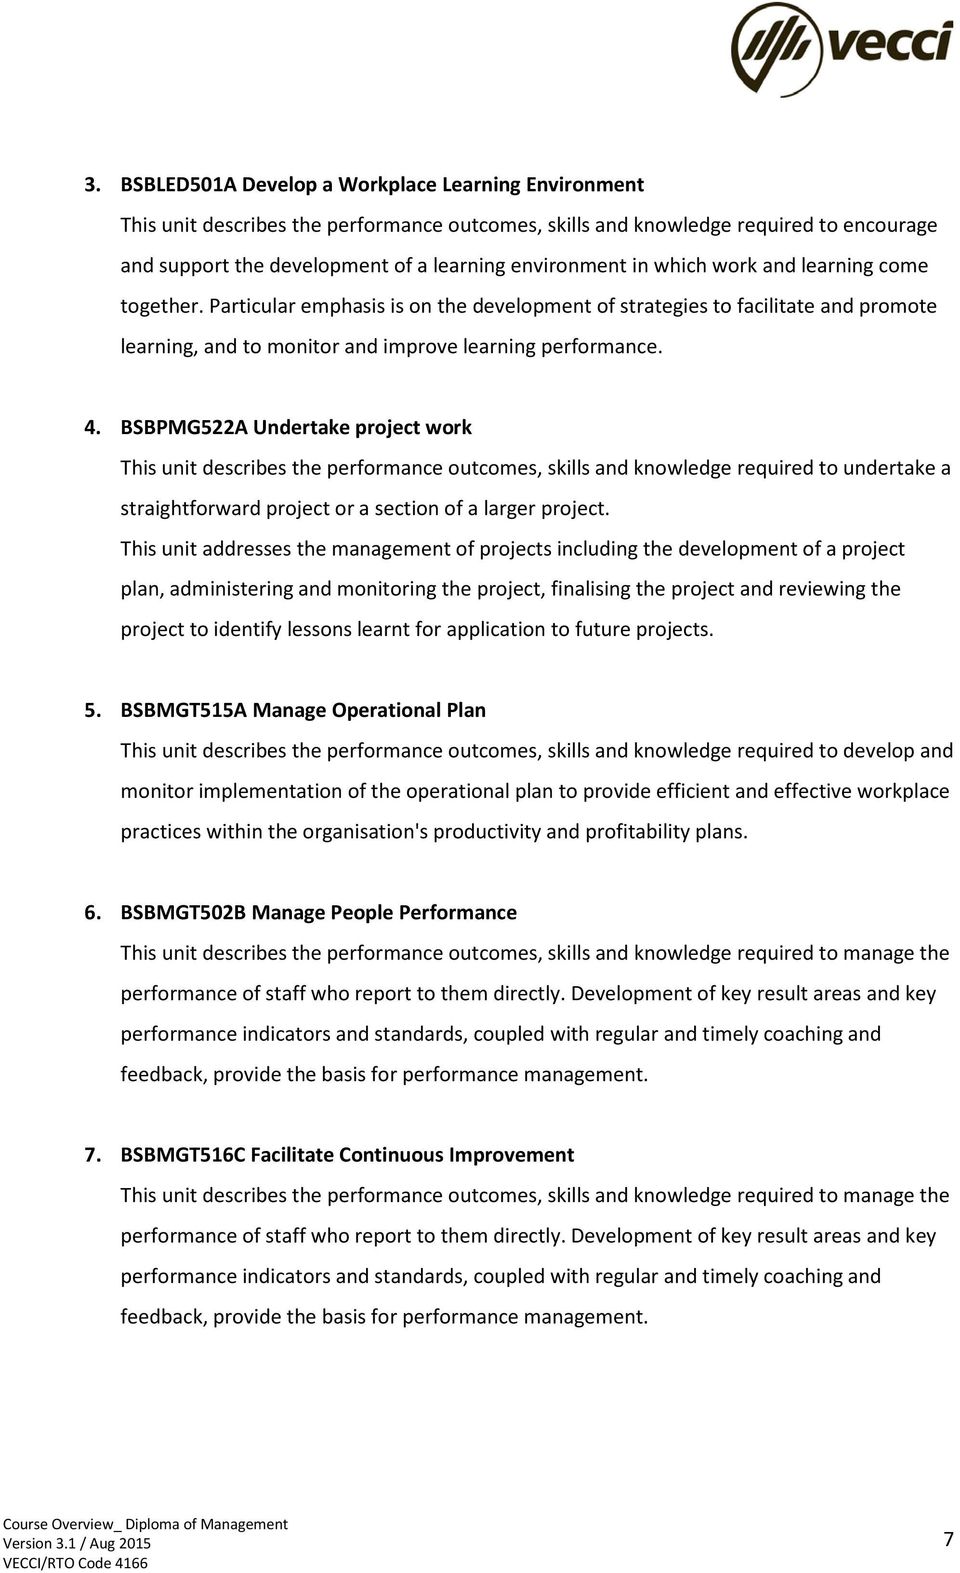 BSBPMG522A Undertake project work This unit describes the performance outcomes, skills and knowledge required to undertake a straightforward project or a section of a larger project.